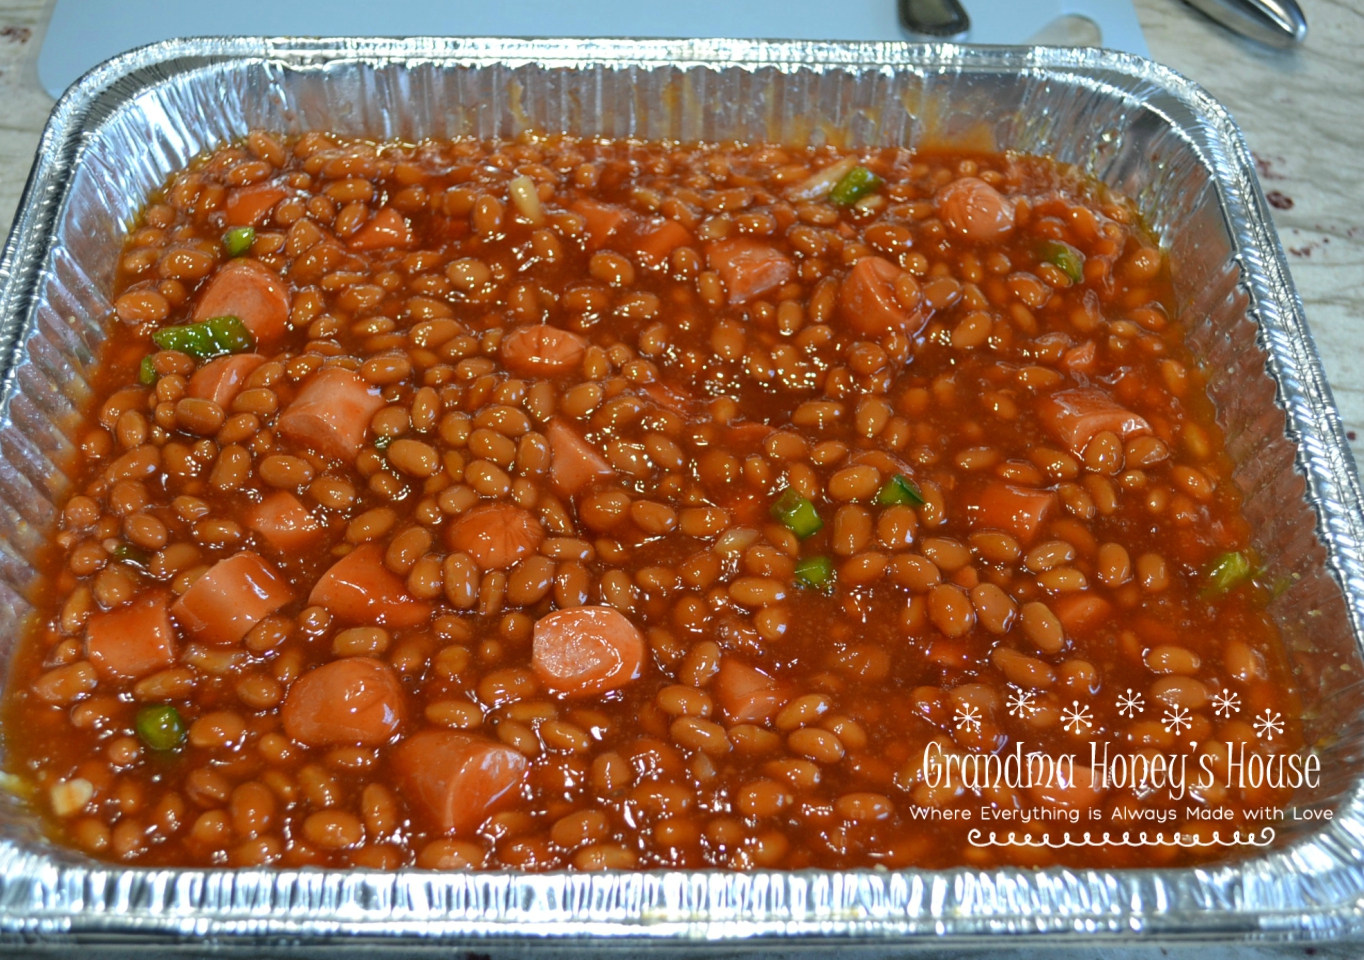 Baked beans and Wieners are a perfect side dish for any cook-out or summertime party.